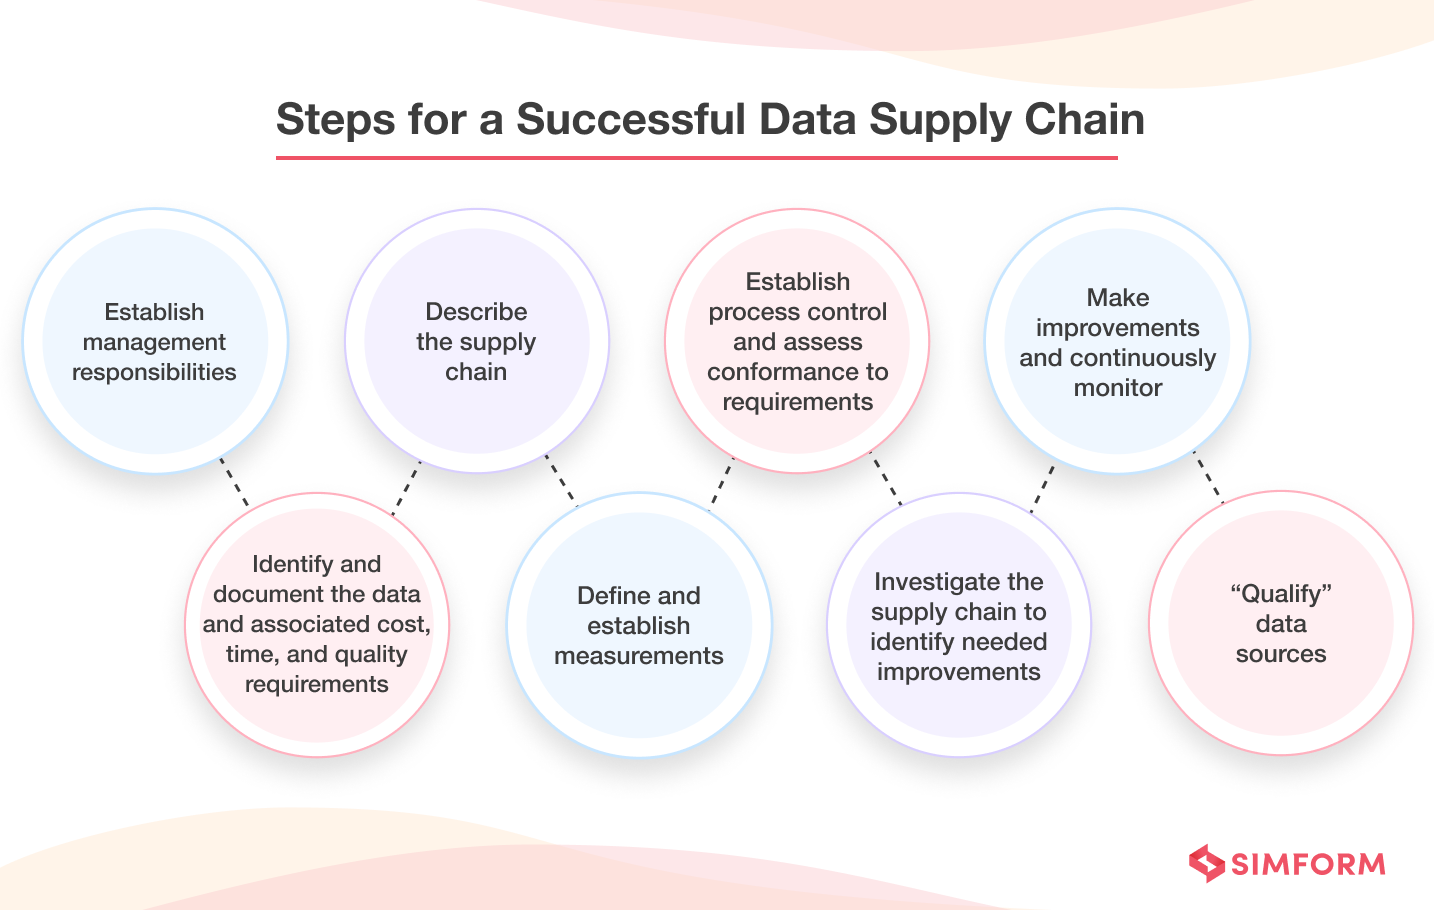 Steps for Data Supply Chain